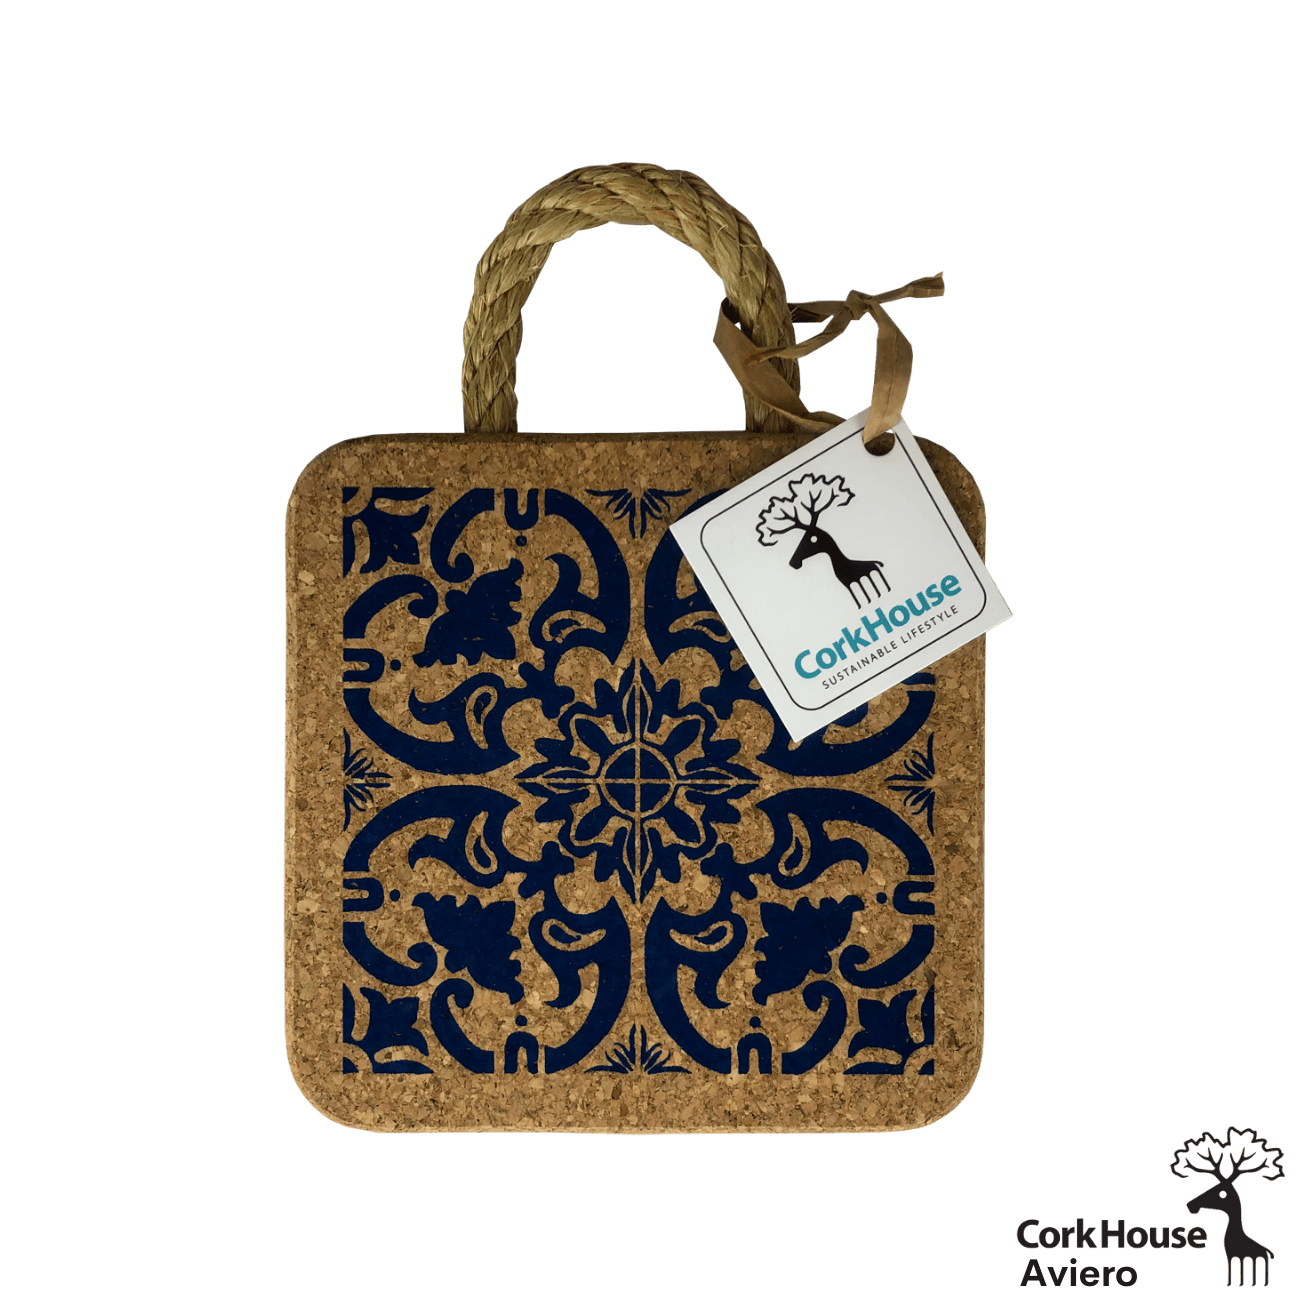 A front view of the cork hot pad features a rope handle for hanging and a cobalt blue traditional tile pattern with the CorkHouse tag.